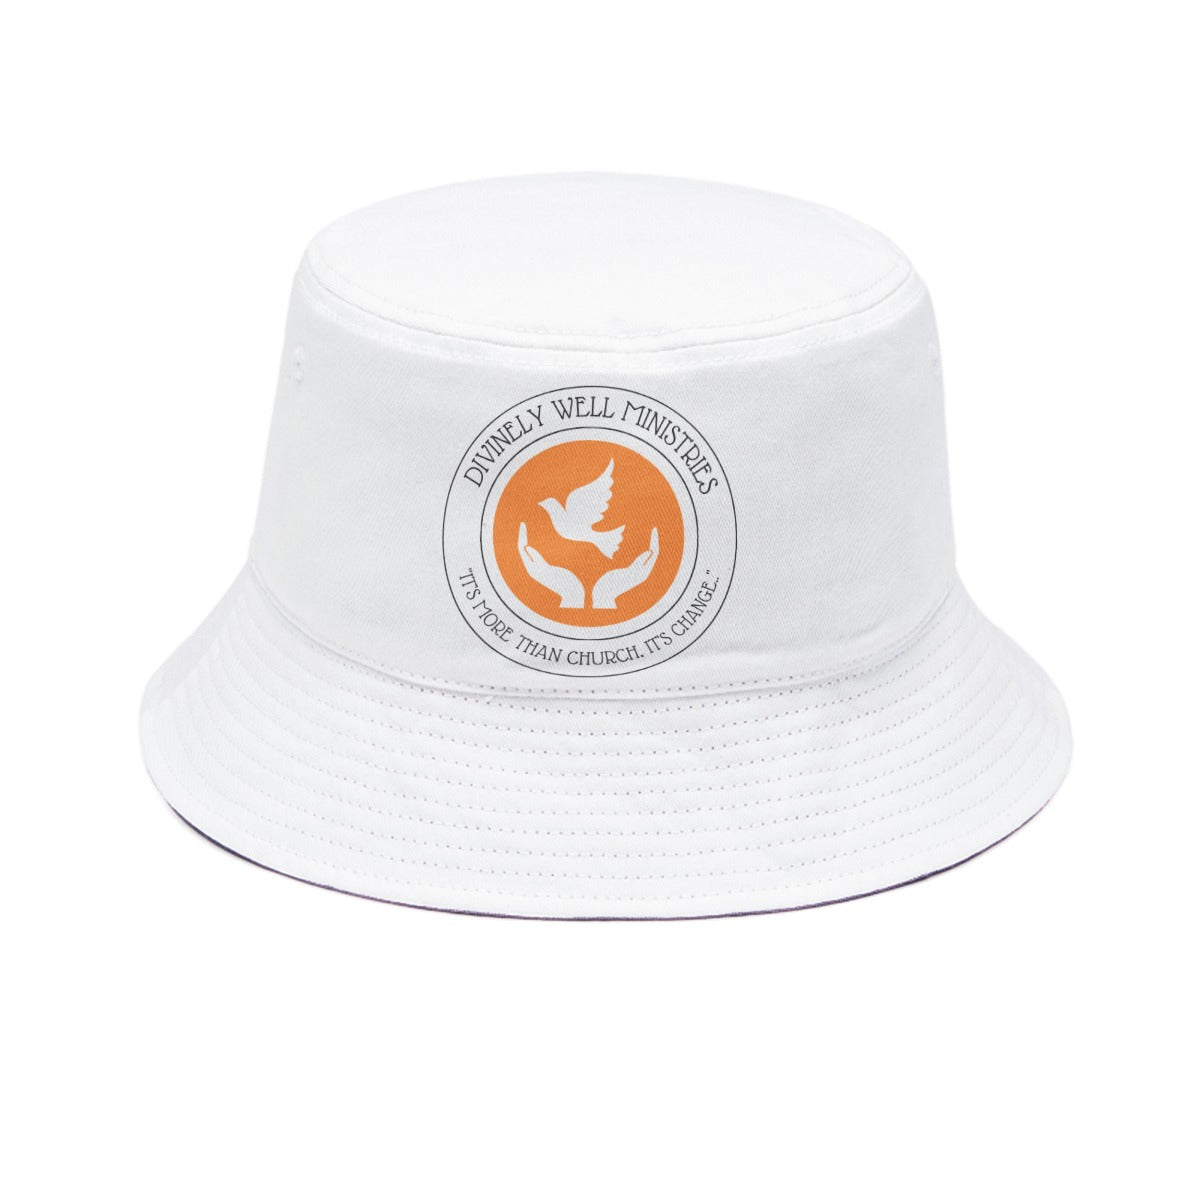 Divinely Well Ministries Bucket Hat